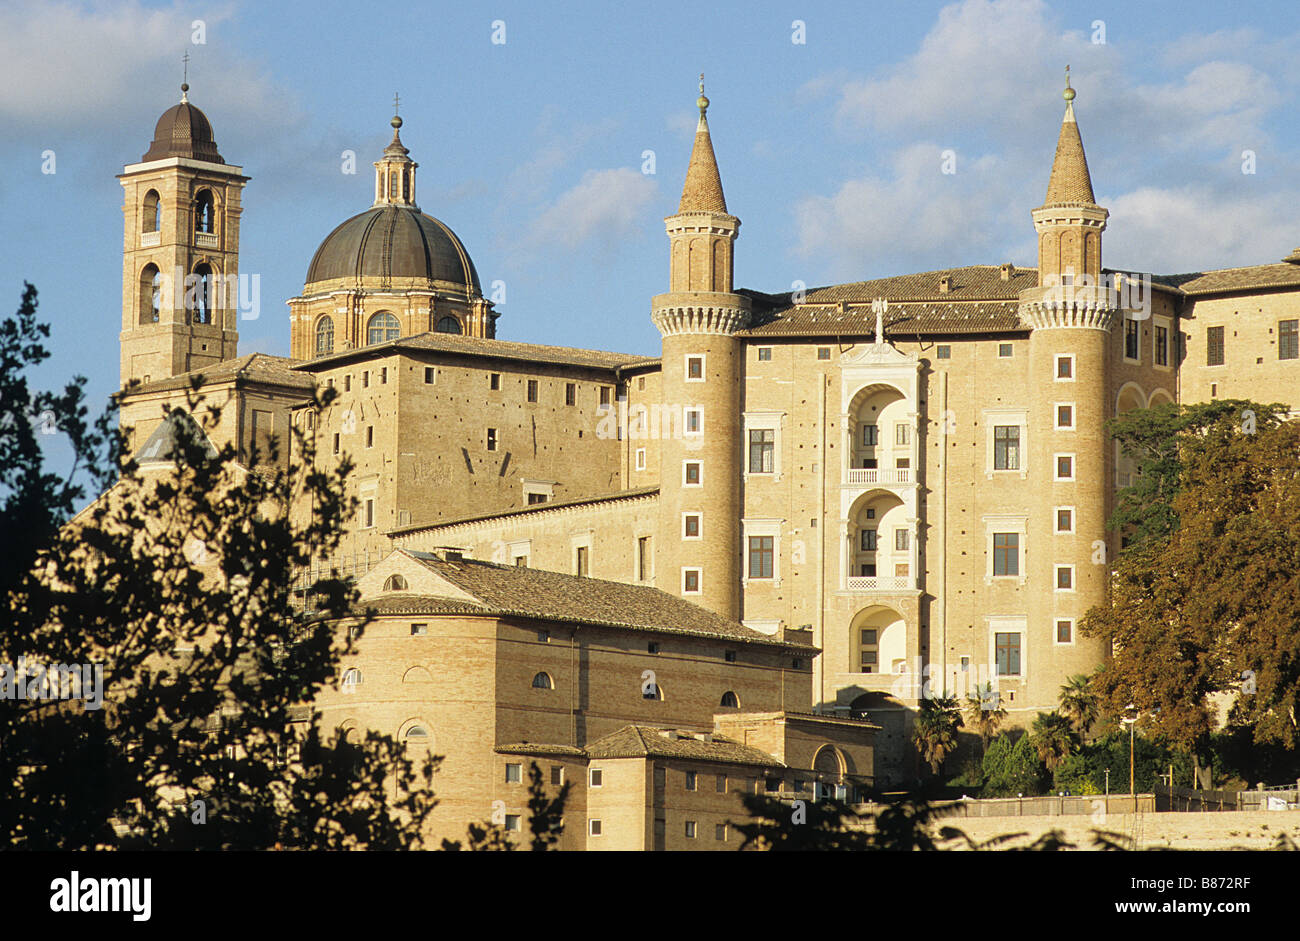 Urbino, Italy, Cathedral and Ducal Palace seen from lower part of the town. Stock Photo